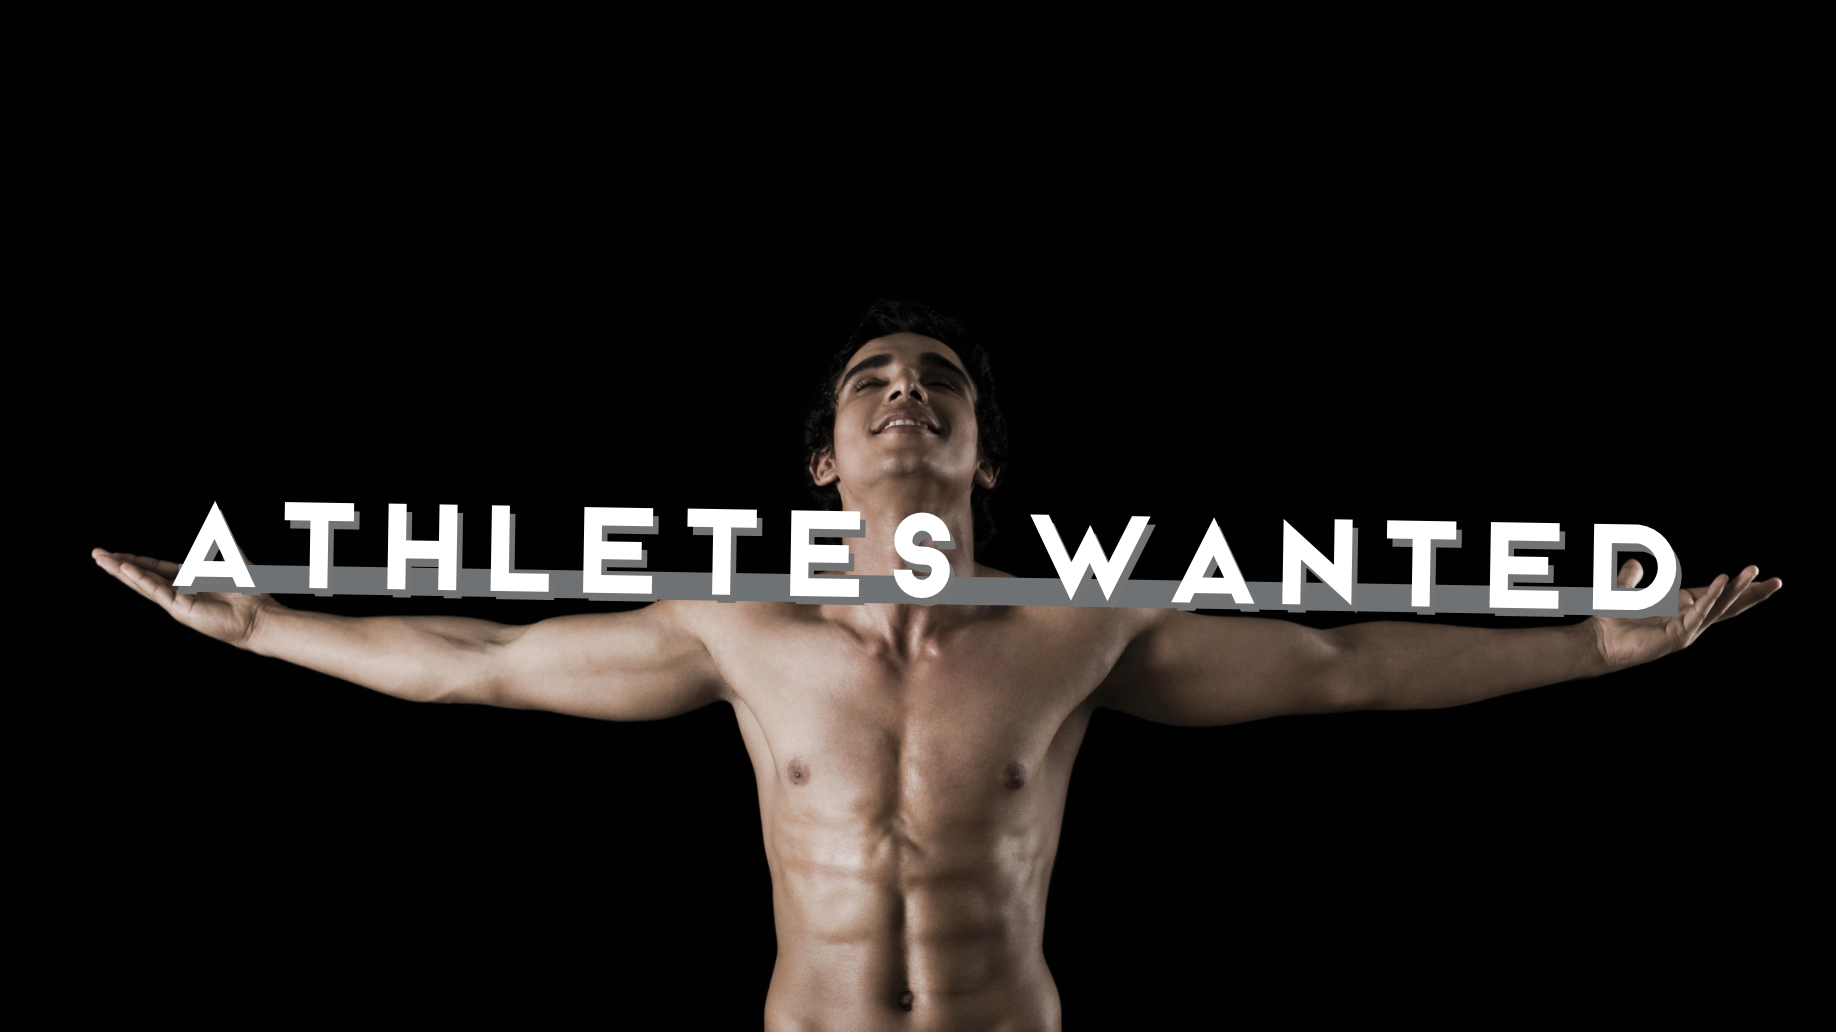 Athletes wanted for porn jobs